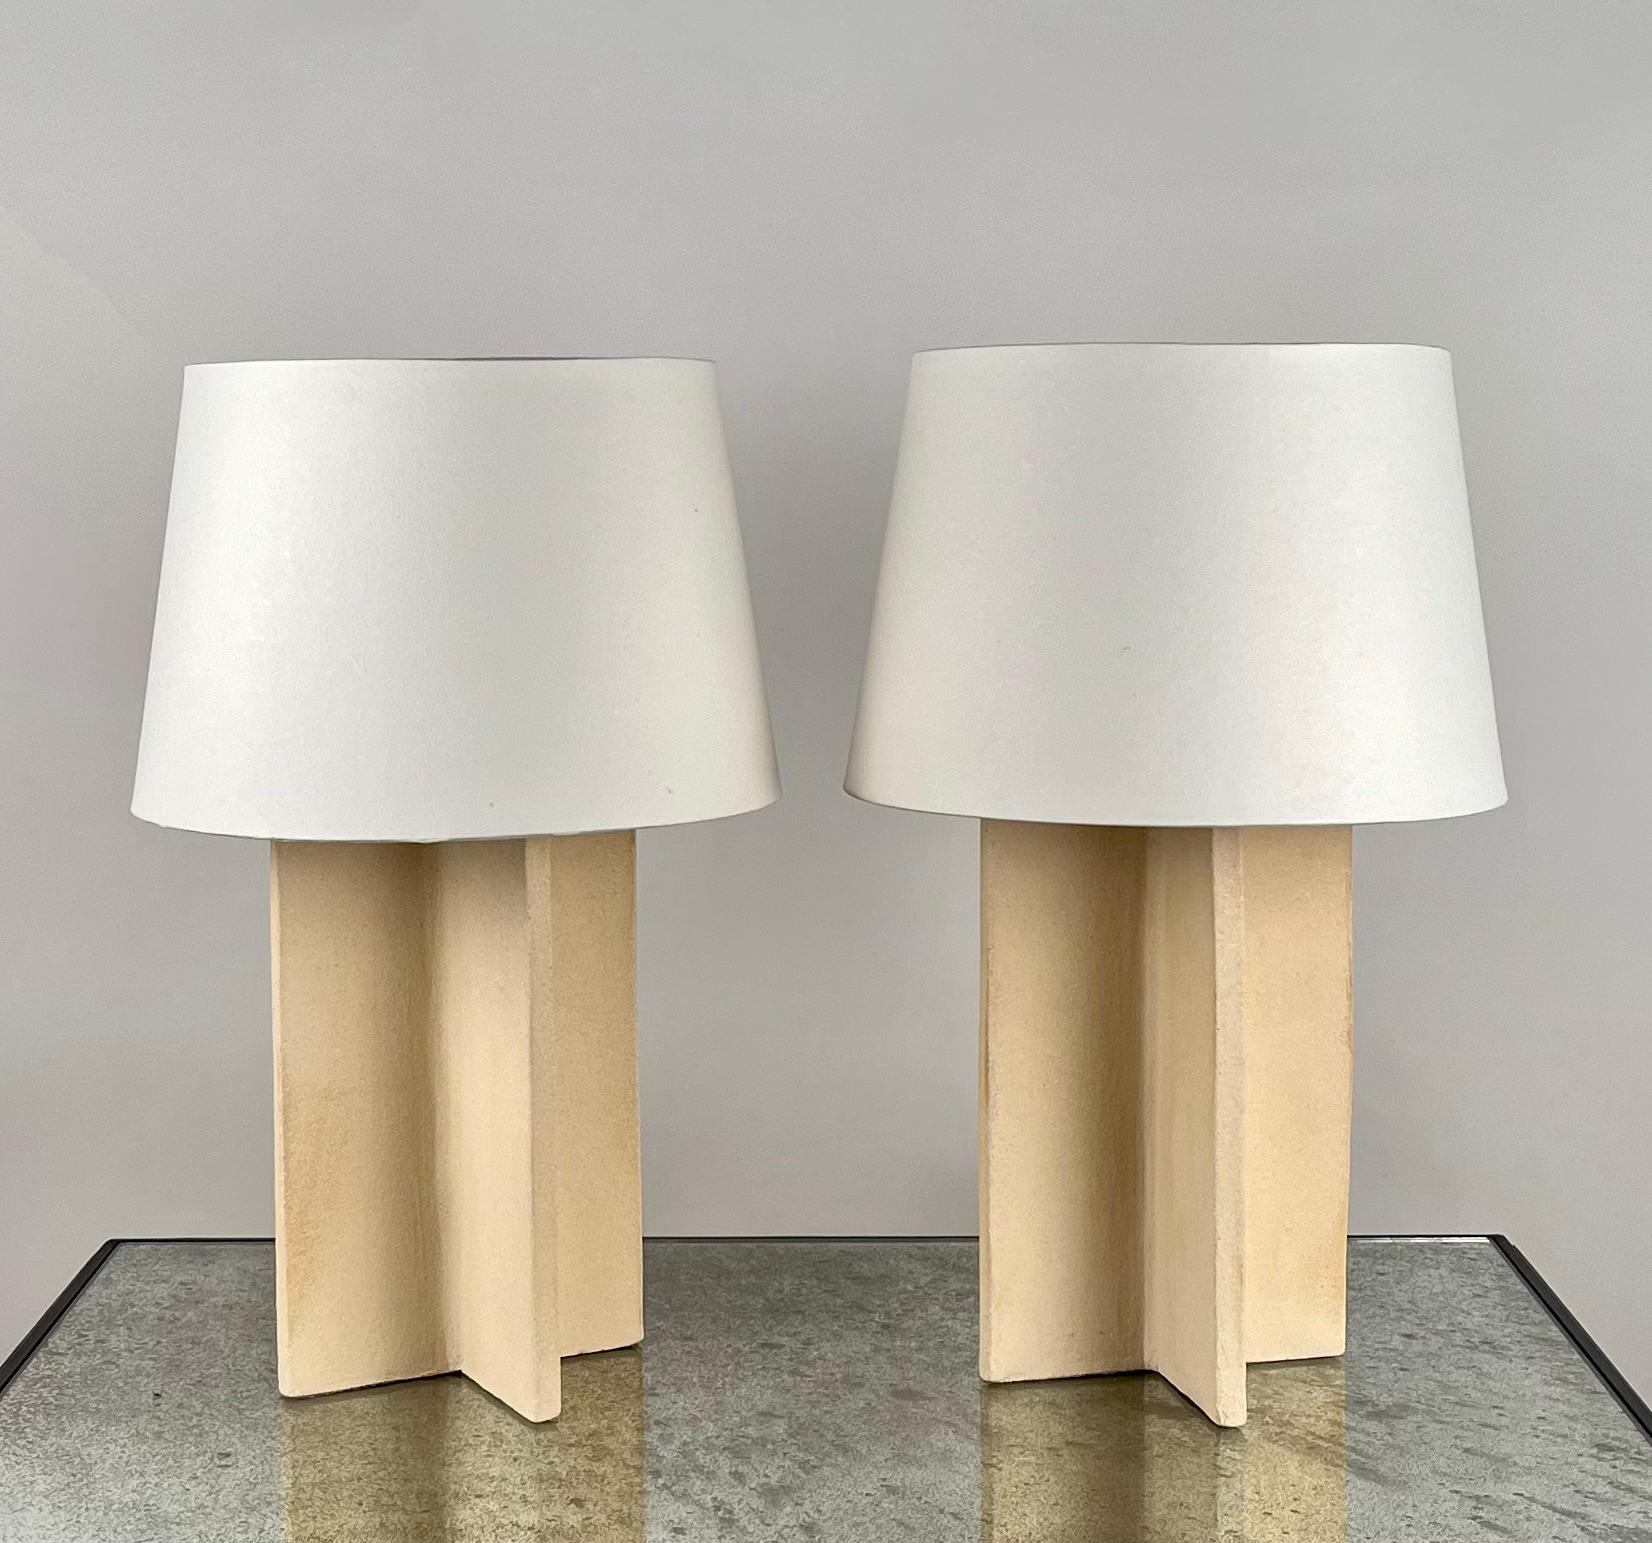 Pair of chic Croisillon cream ceramic lamps with parchment shades by Design Frères.

An attractive, understated combination of ceramic crosspiece bases with a cream matte glaze and European style parchment shades (no harps or finials).

Dimensions